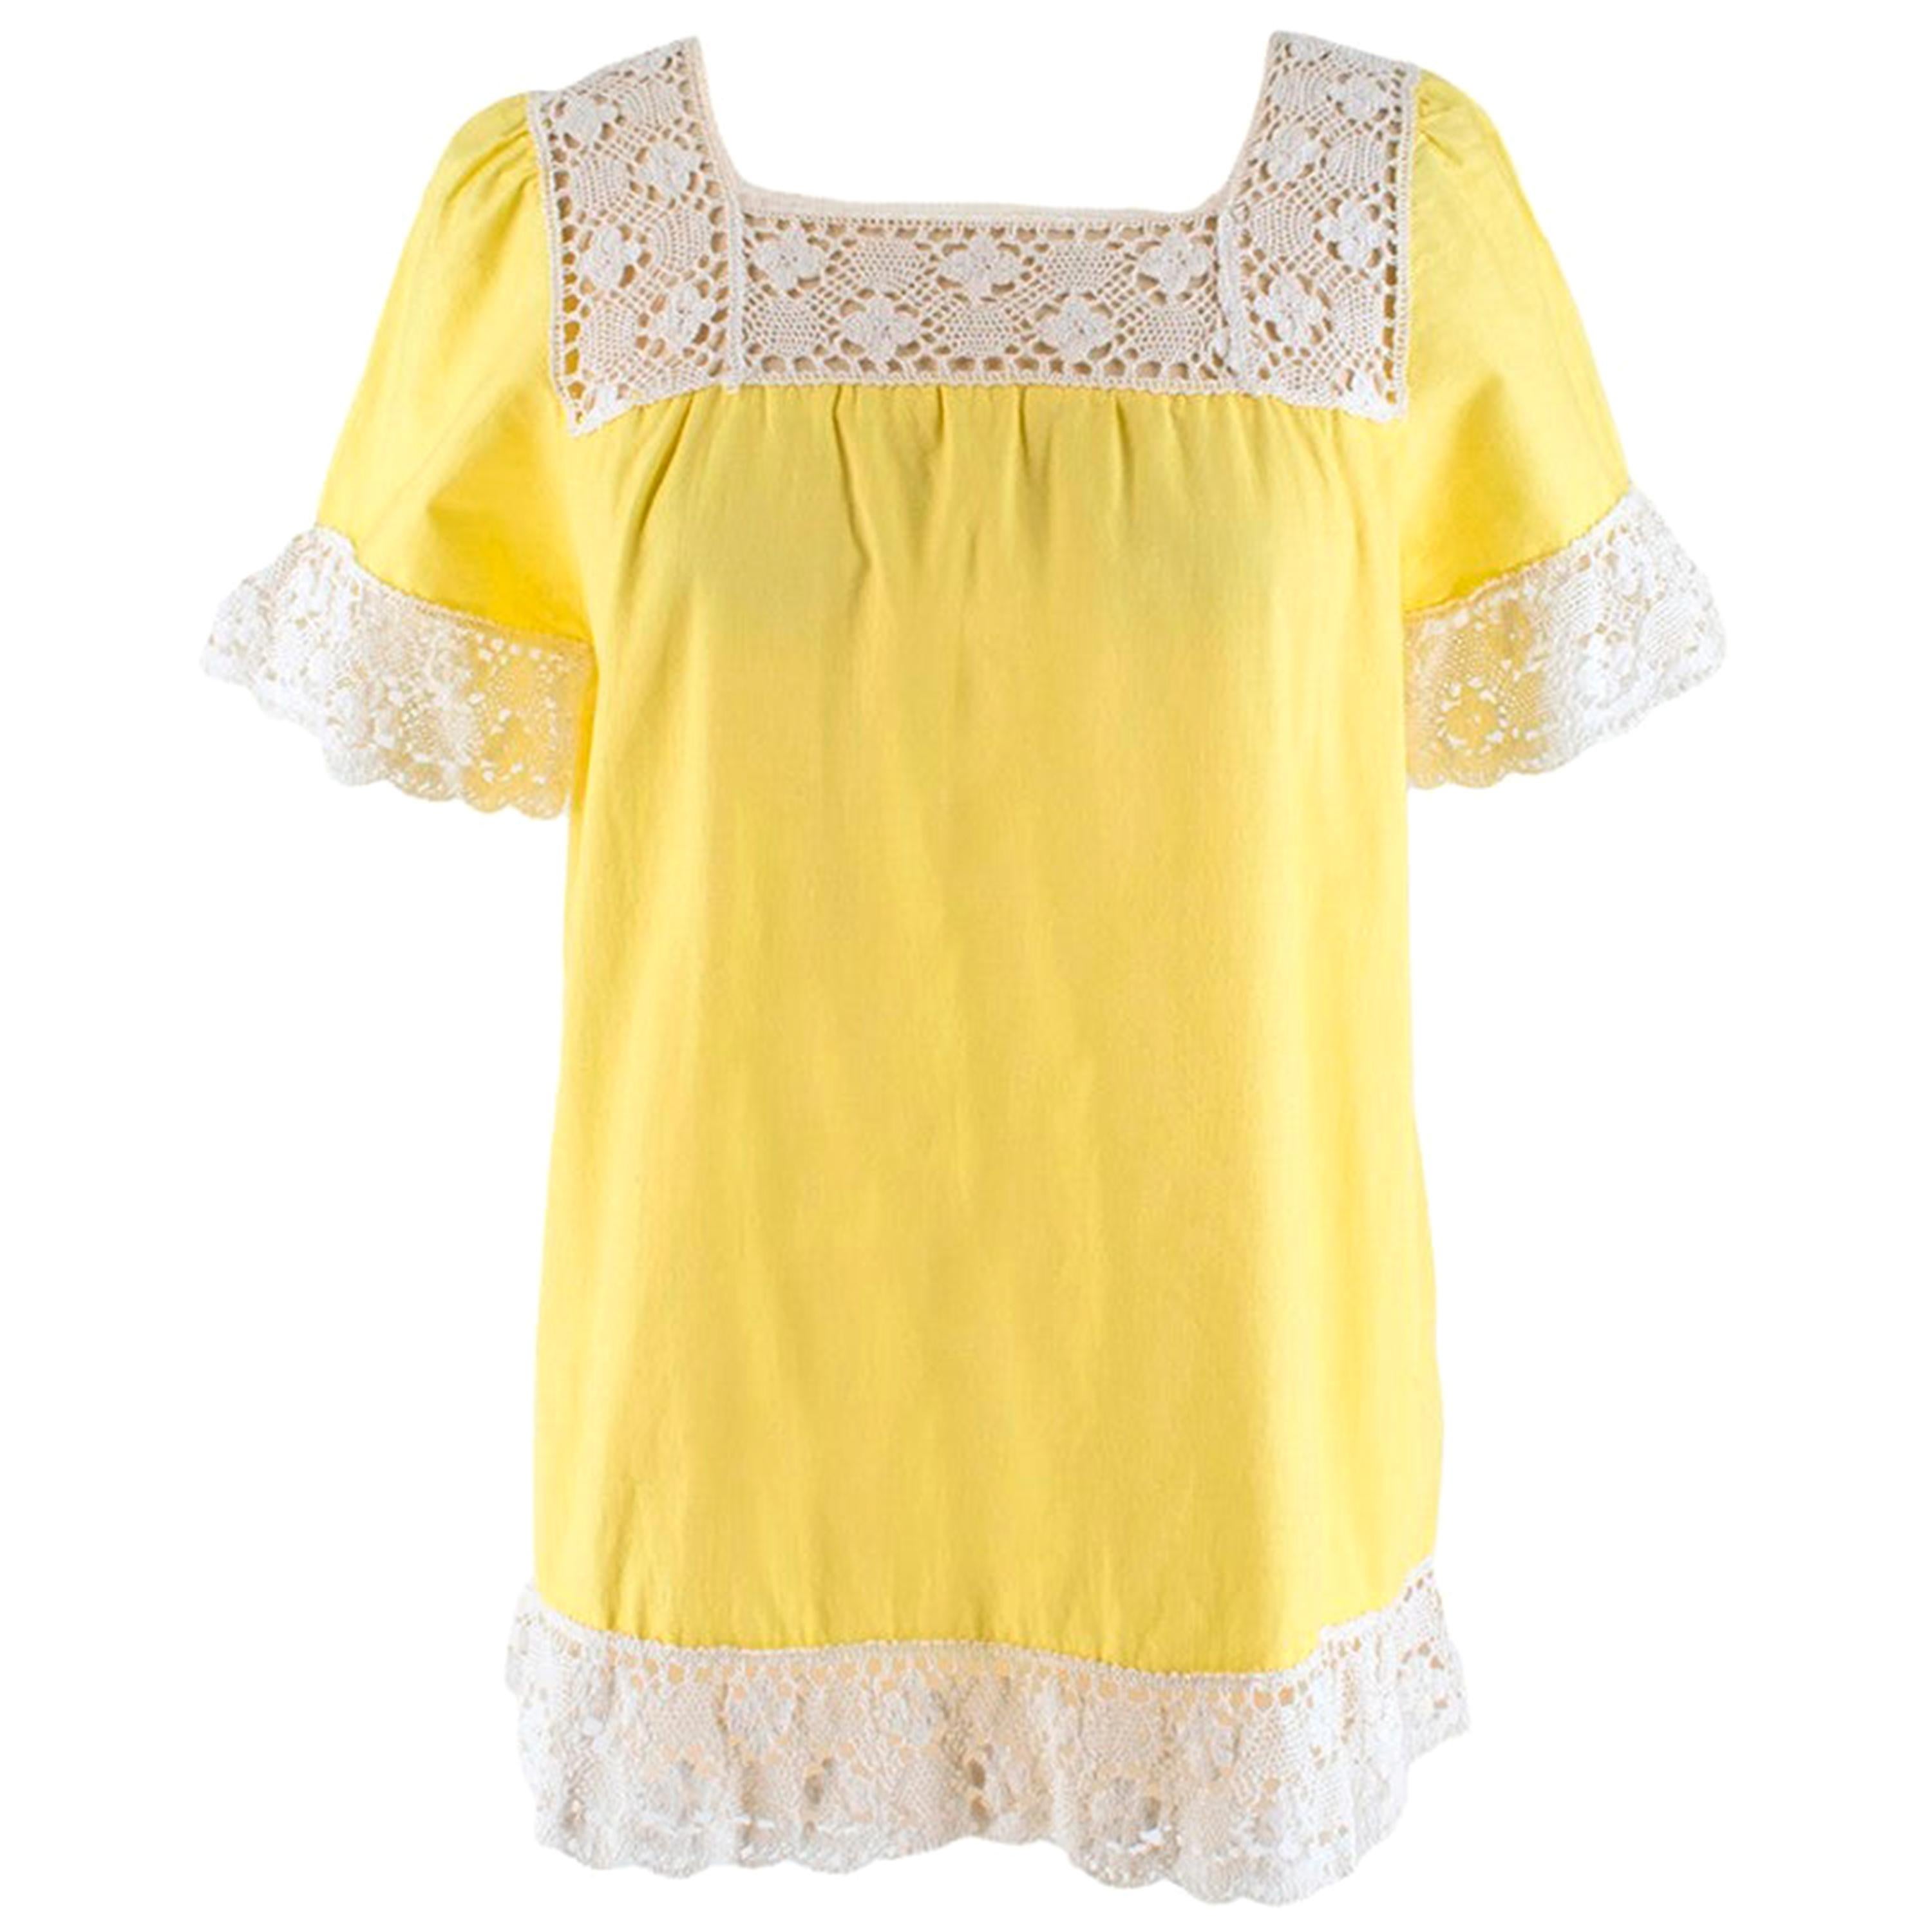 One Vintage Crochet Trimmed Yellow Top - Size S For Sale